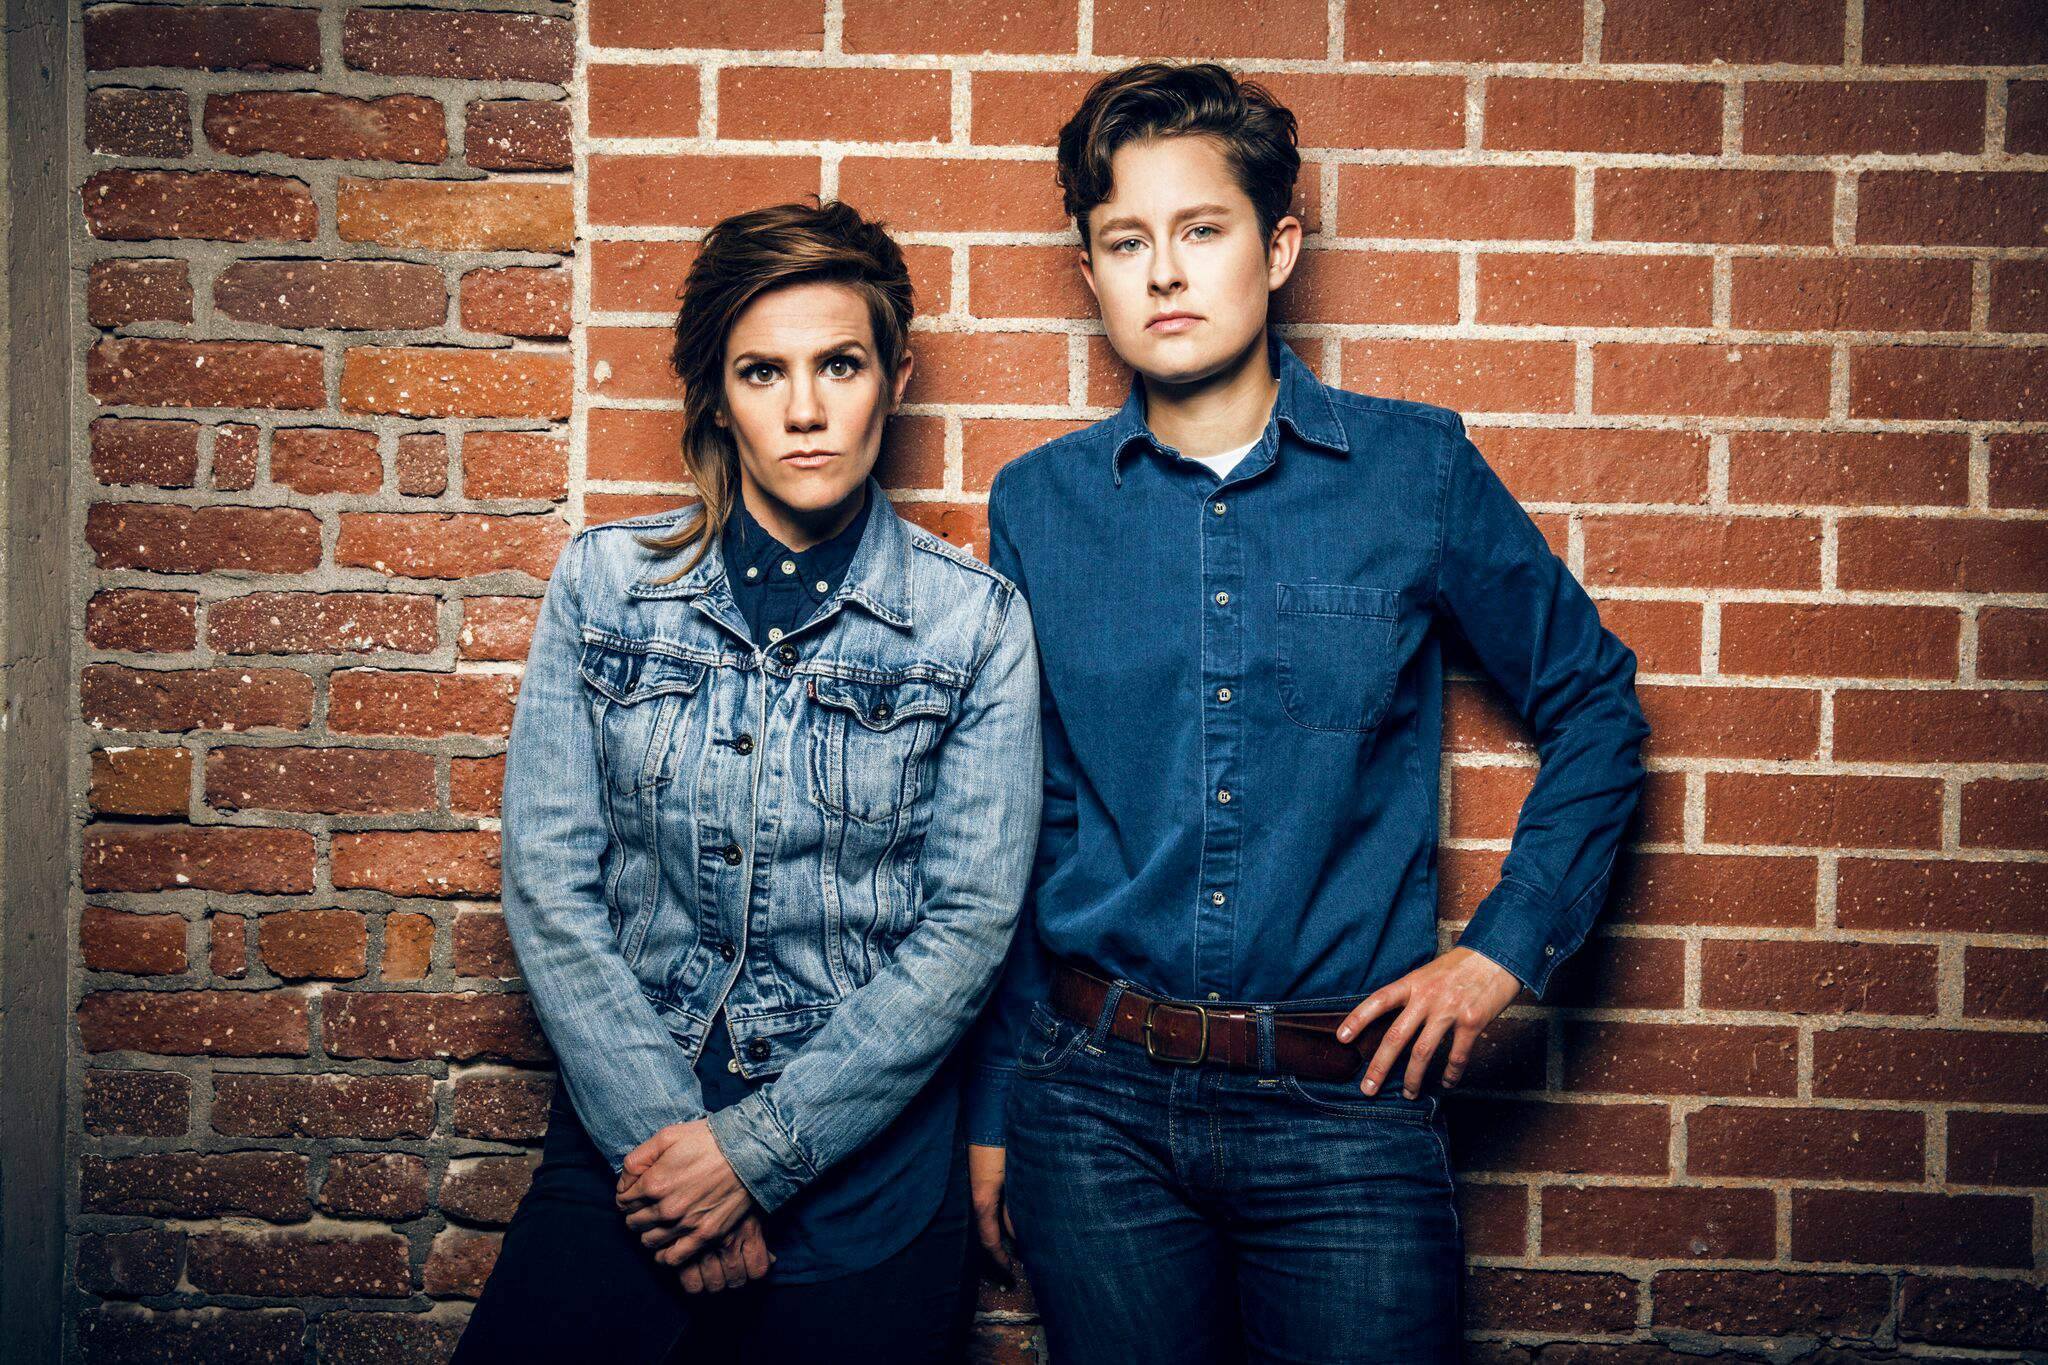 Finding Laughs in Heavy Times: an Interview with Comedy Power Couple Cameron Esposito and Rhea Butcher